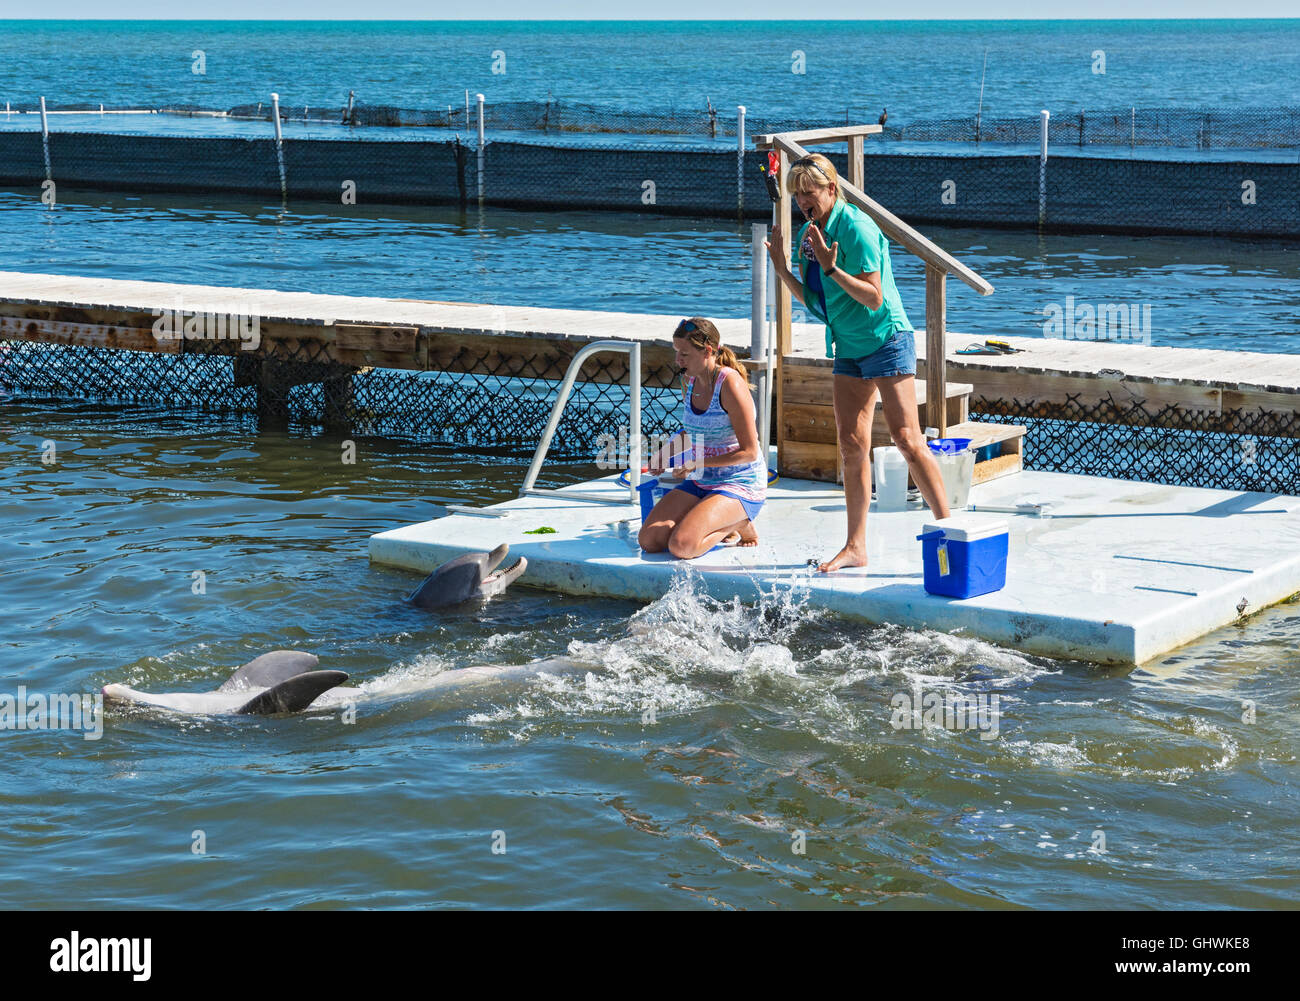 Florida Keys, Grassy Key, Dolphin Research Center, dolphin trainers Stock Photo